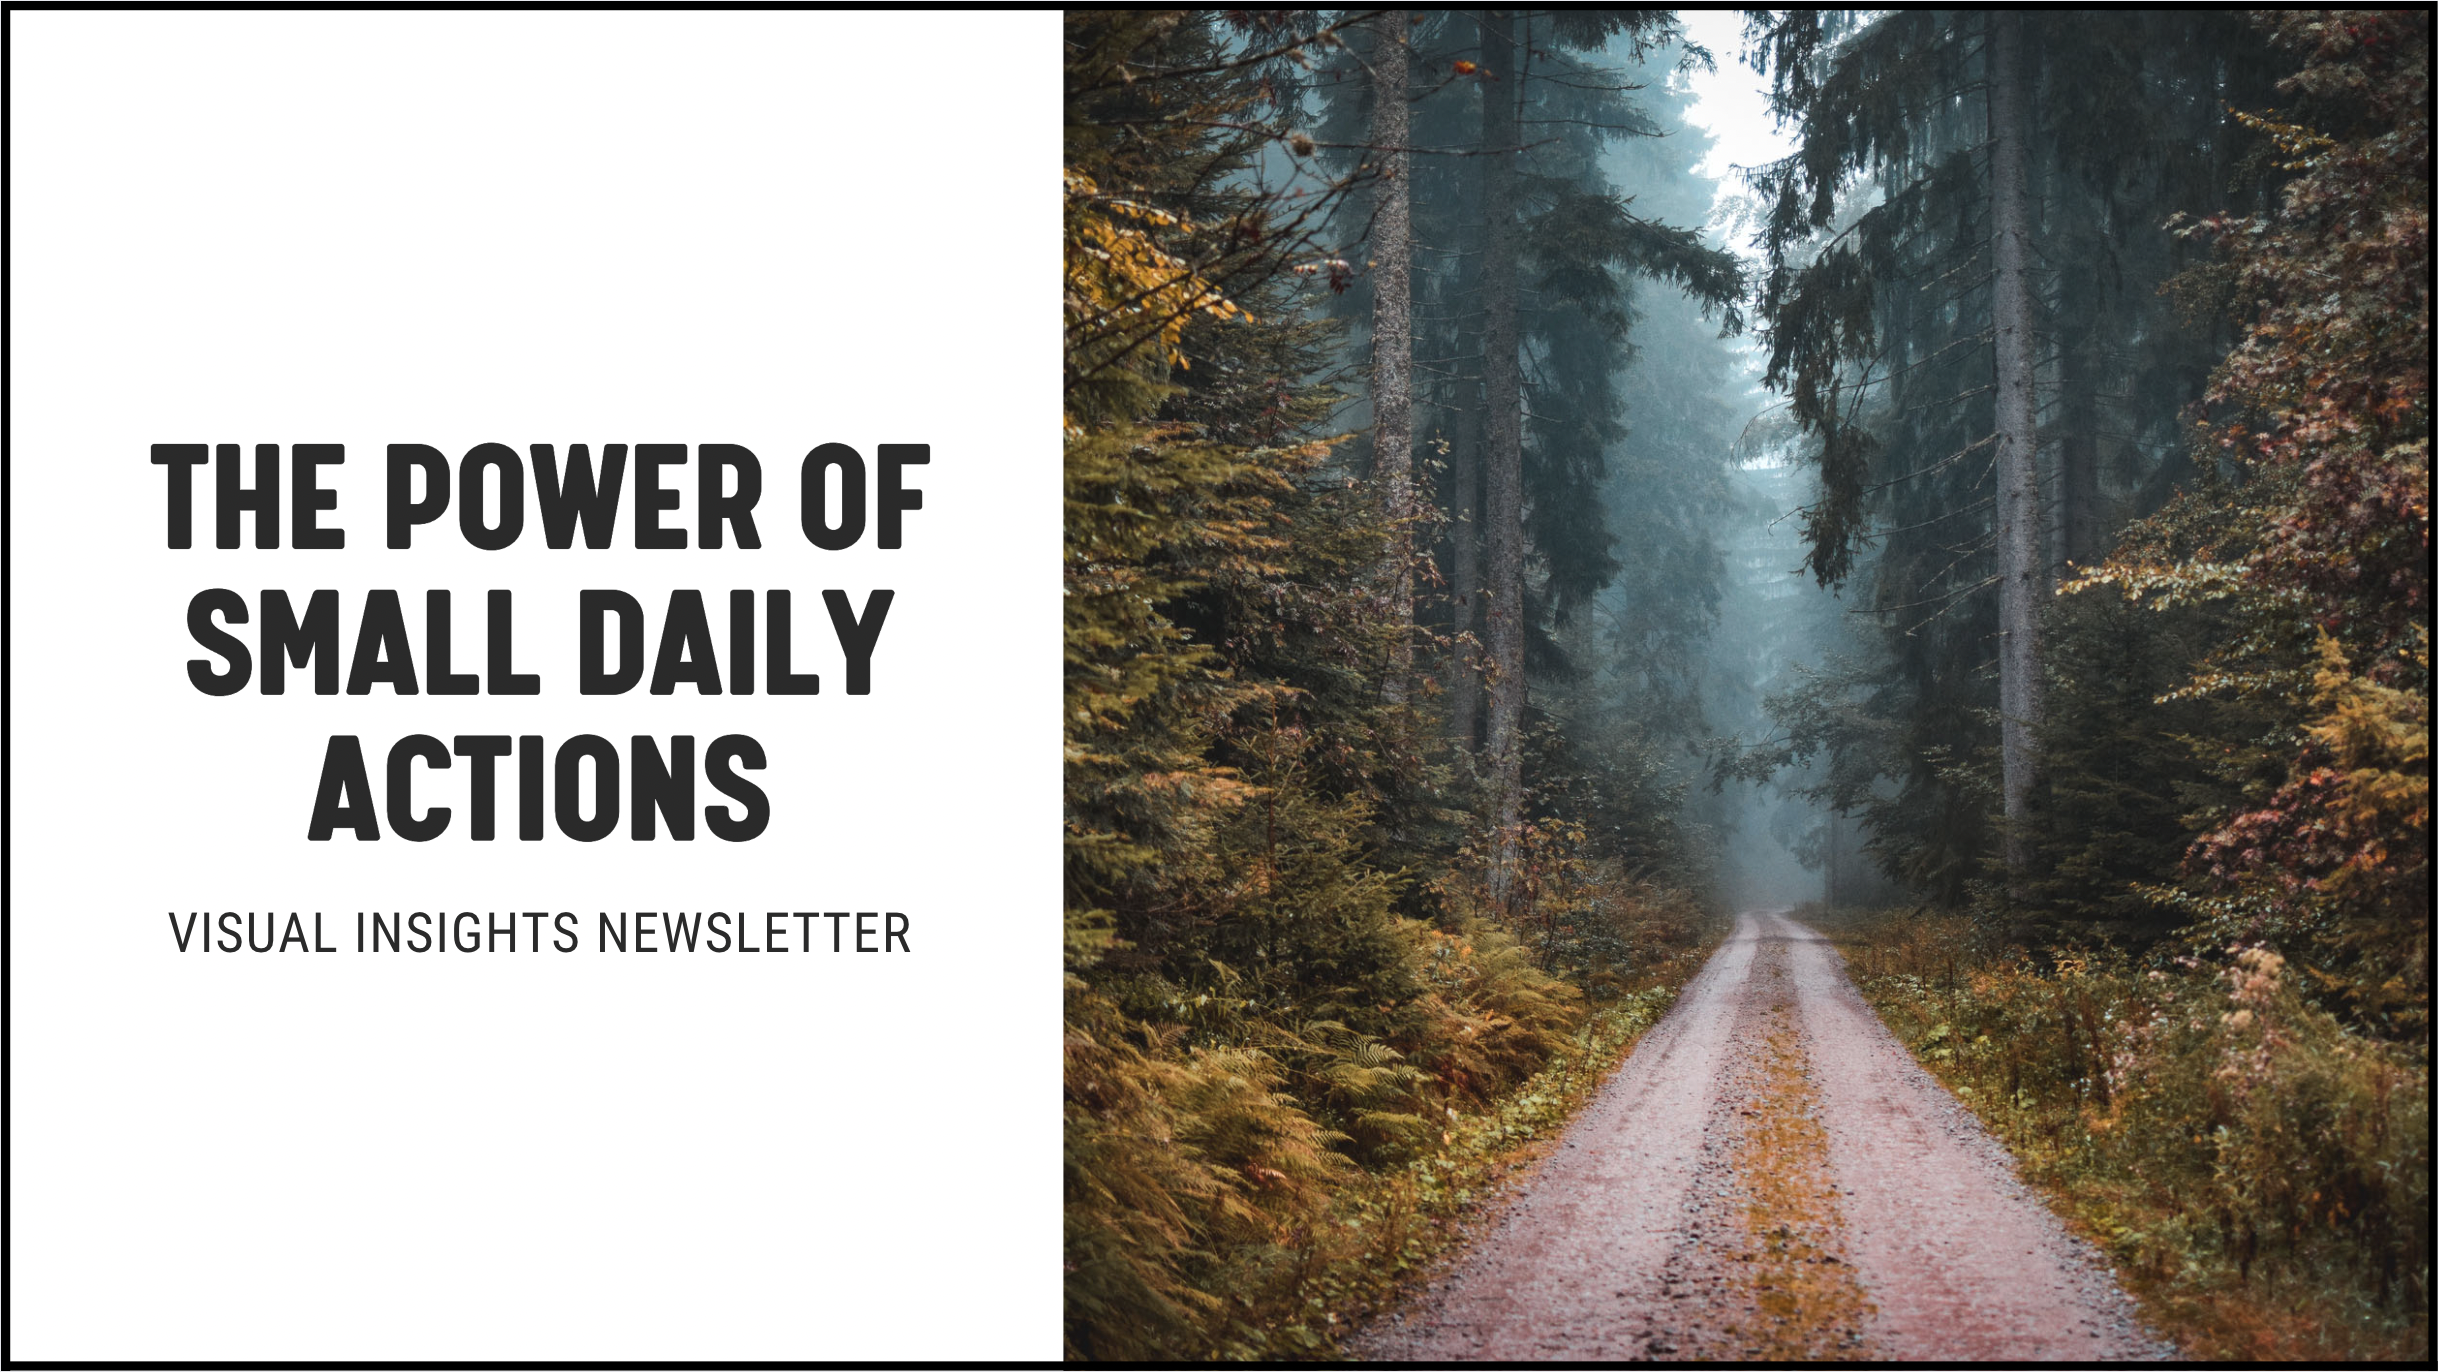 [NEW] The Power of Small Daily Actions - Visual Insights Newsletter Marketing Campaigns for Financial Advisors